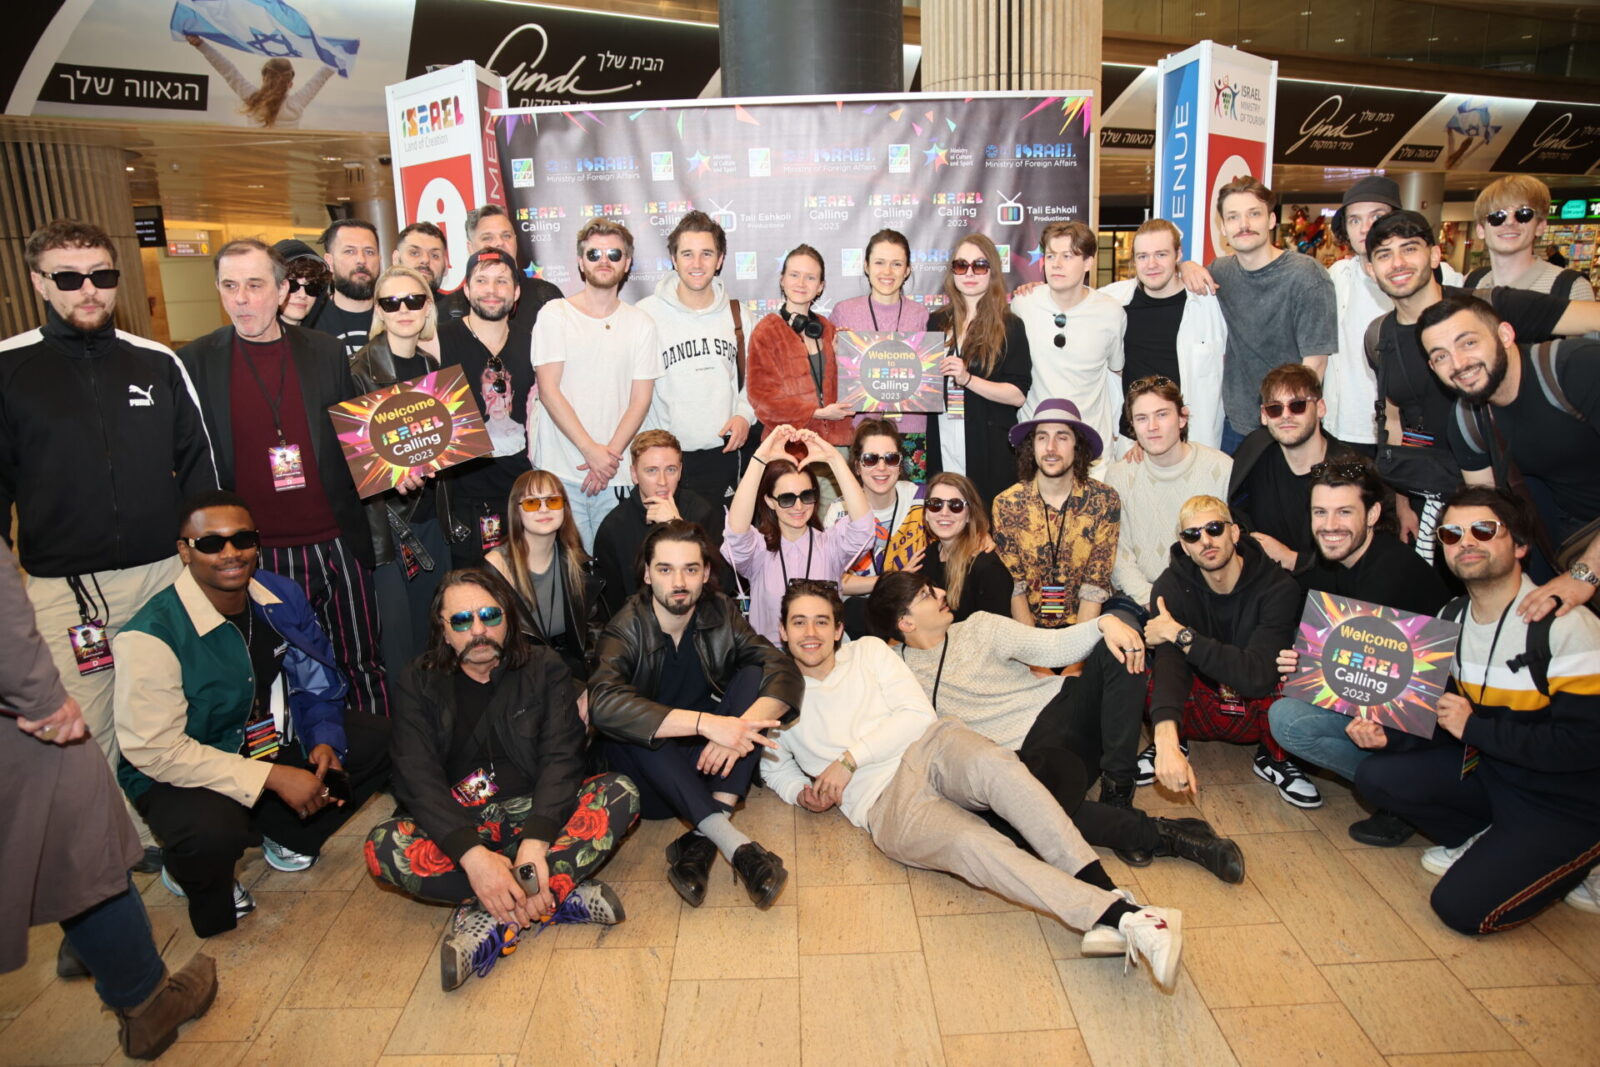 The Eurovision contestants arrive in Israel for a few days of song contest fun. Photo by Or Ghefen